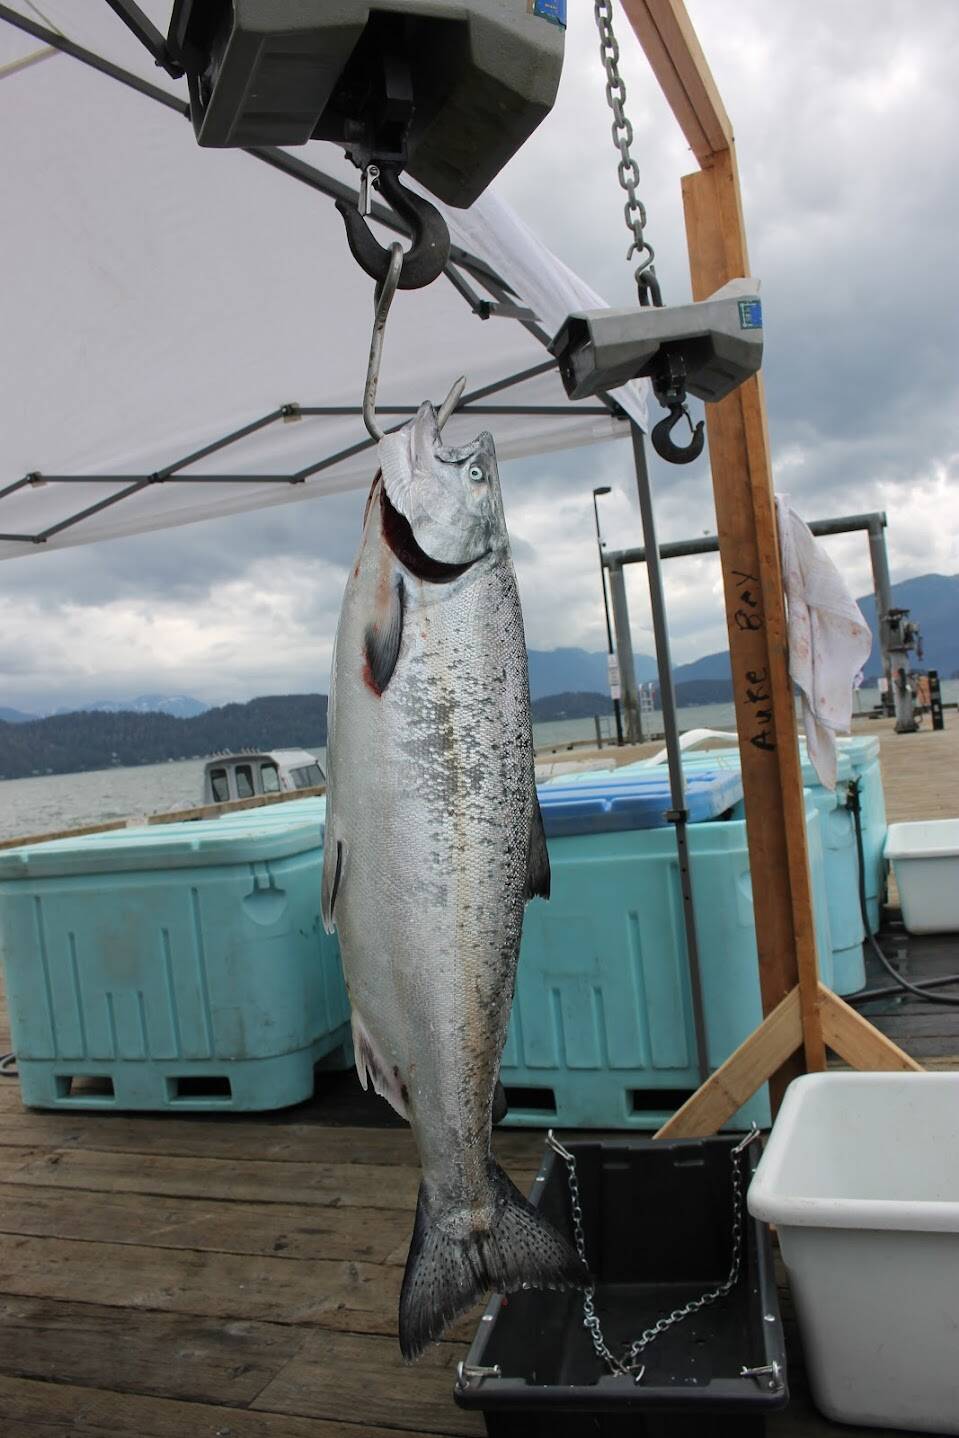 A salmon gets weighed at the Auke Nu Harbor station for the 76th annual Golden North Salmon Derby. (Clarise Larson / Juneau Empire)